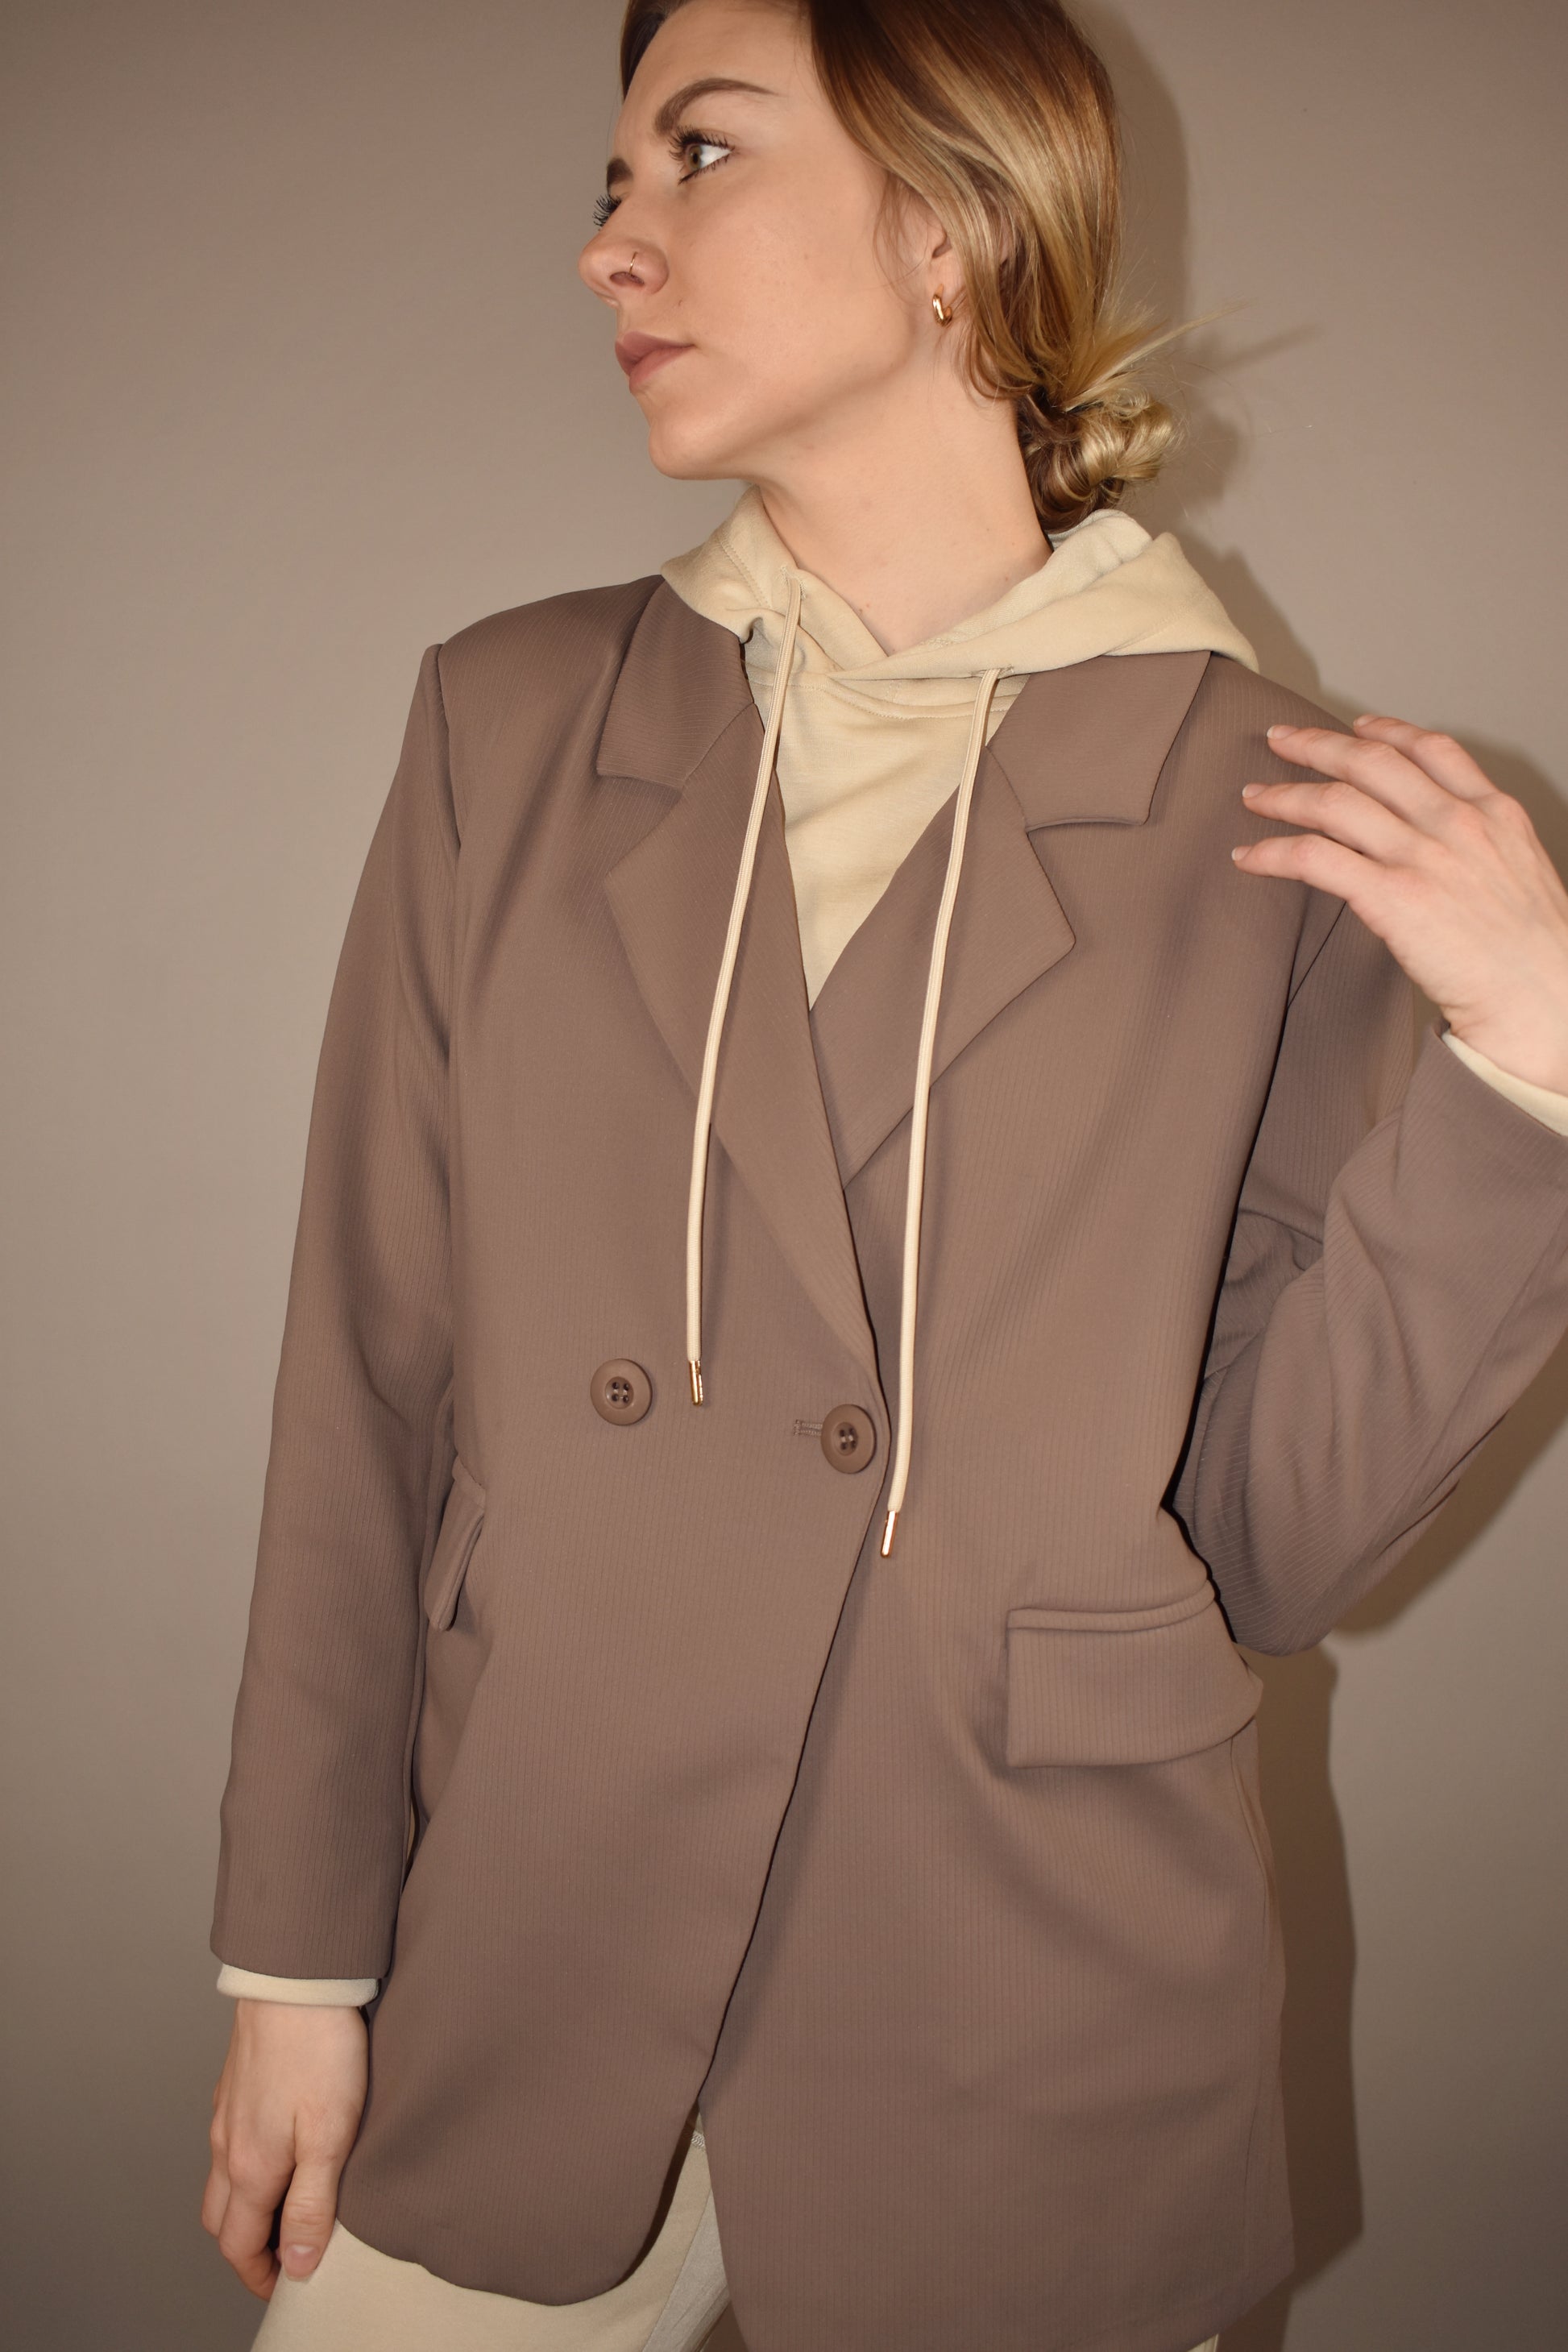 athletic and stretchy oversized blazer with shoulder pads and front flap patch pockets.